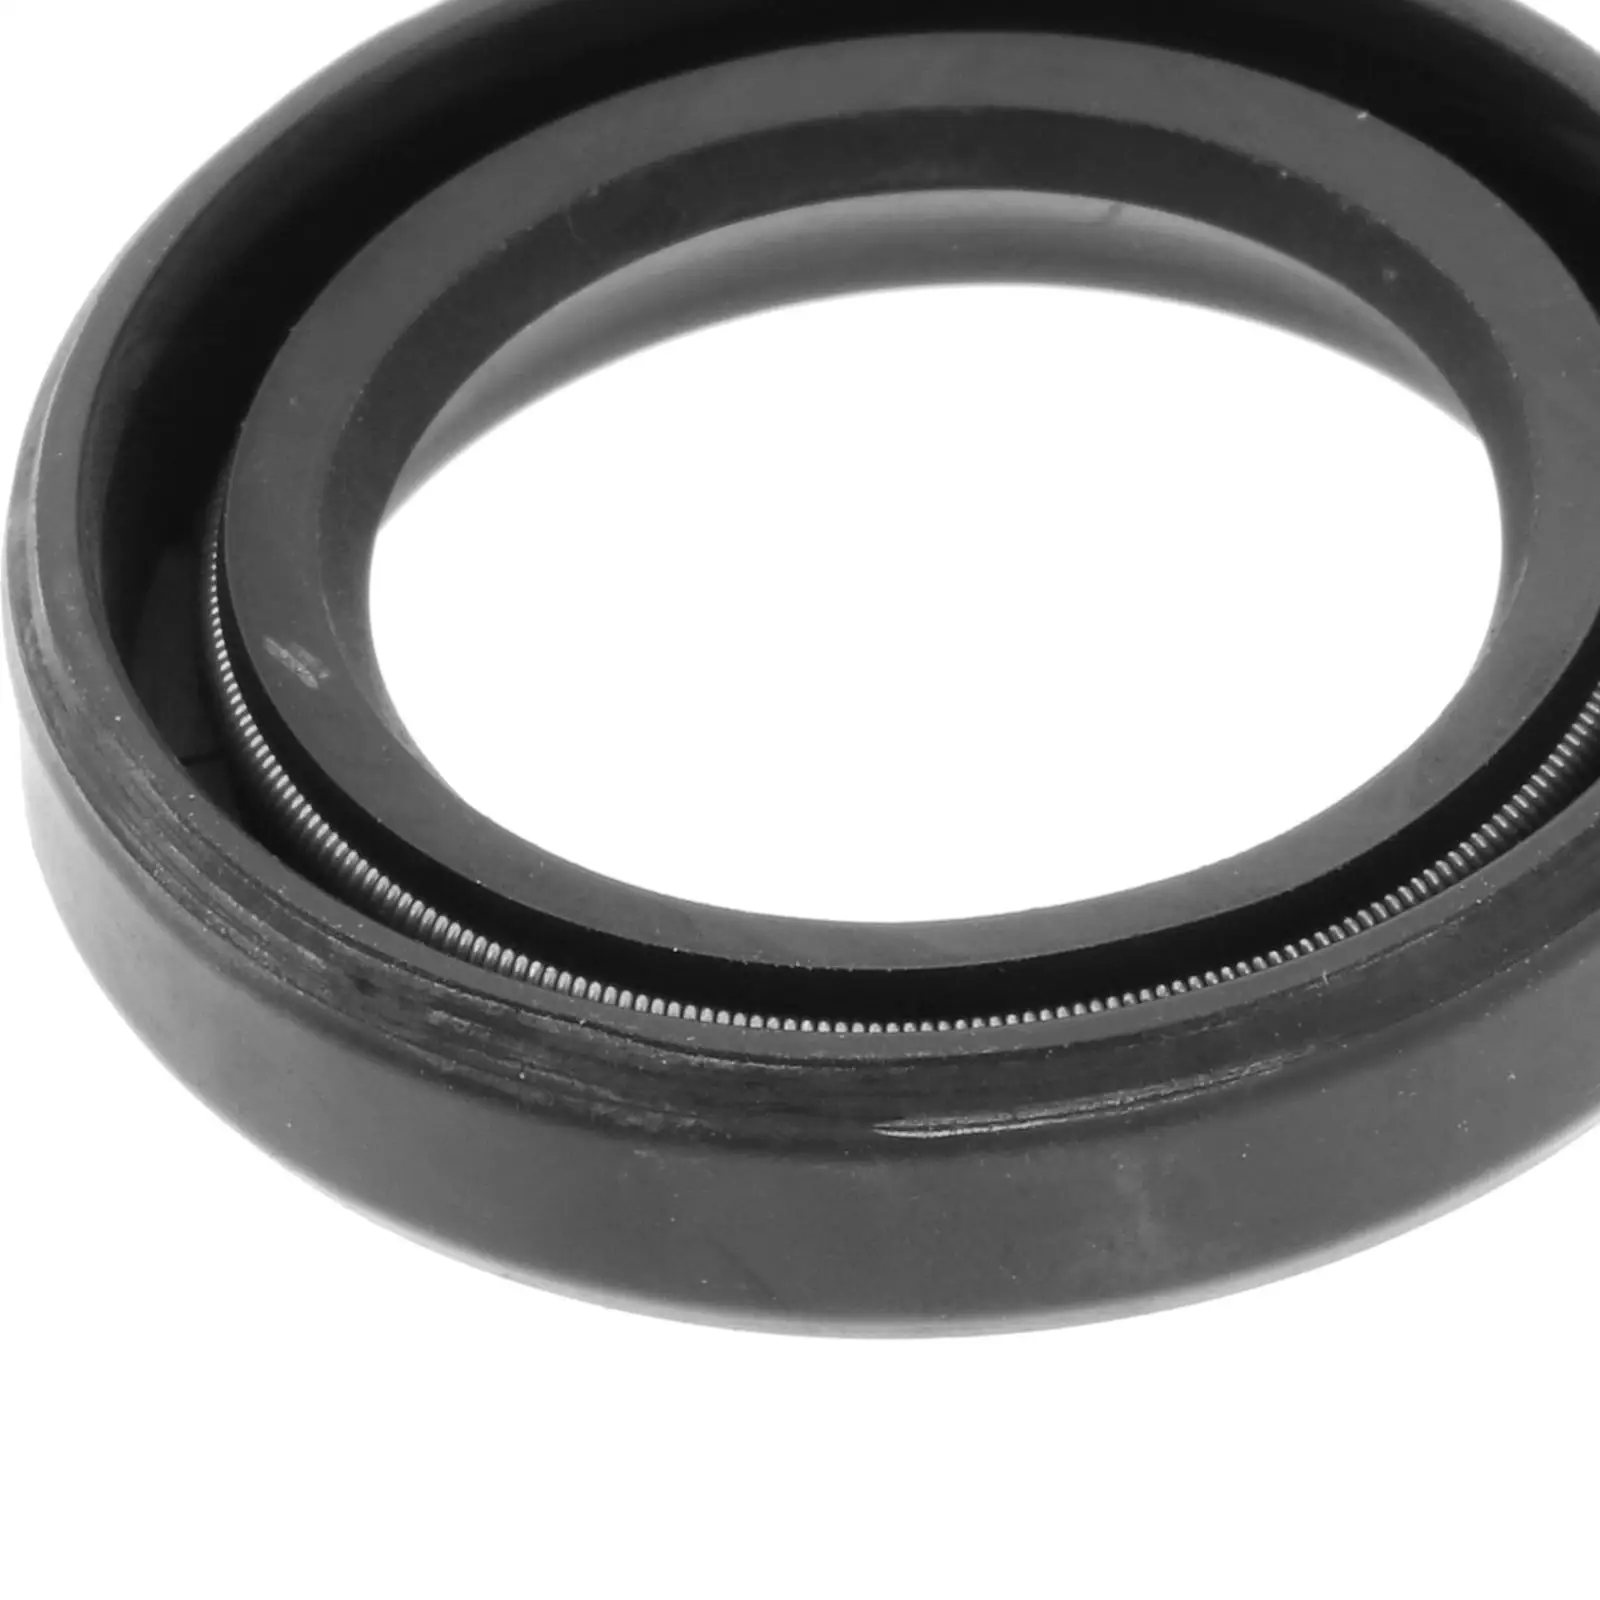 Oil Seal S-type Motocycle Accessory Replacements Parts for Yamaha Outboard 8HP, 9HP, 9.9HP, 15HP, 20HP, 25HP